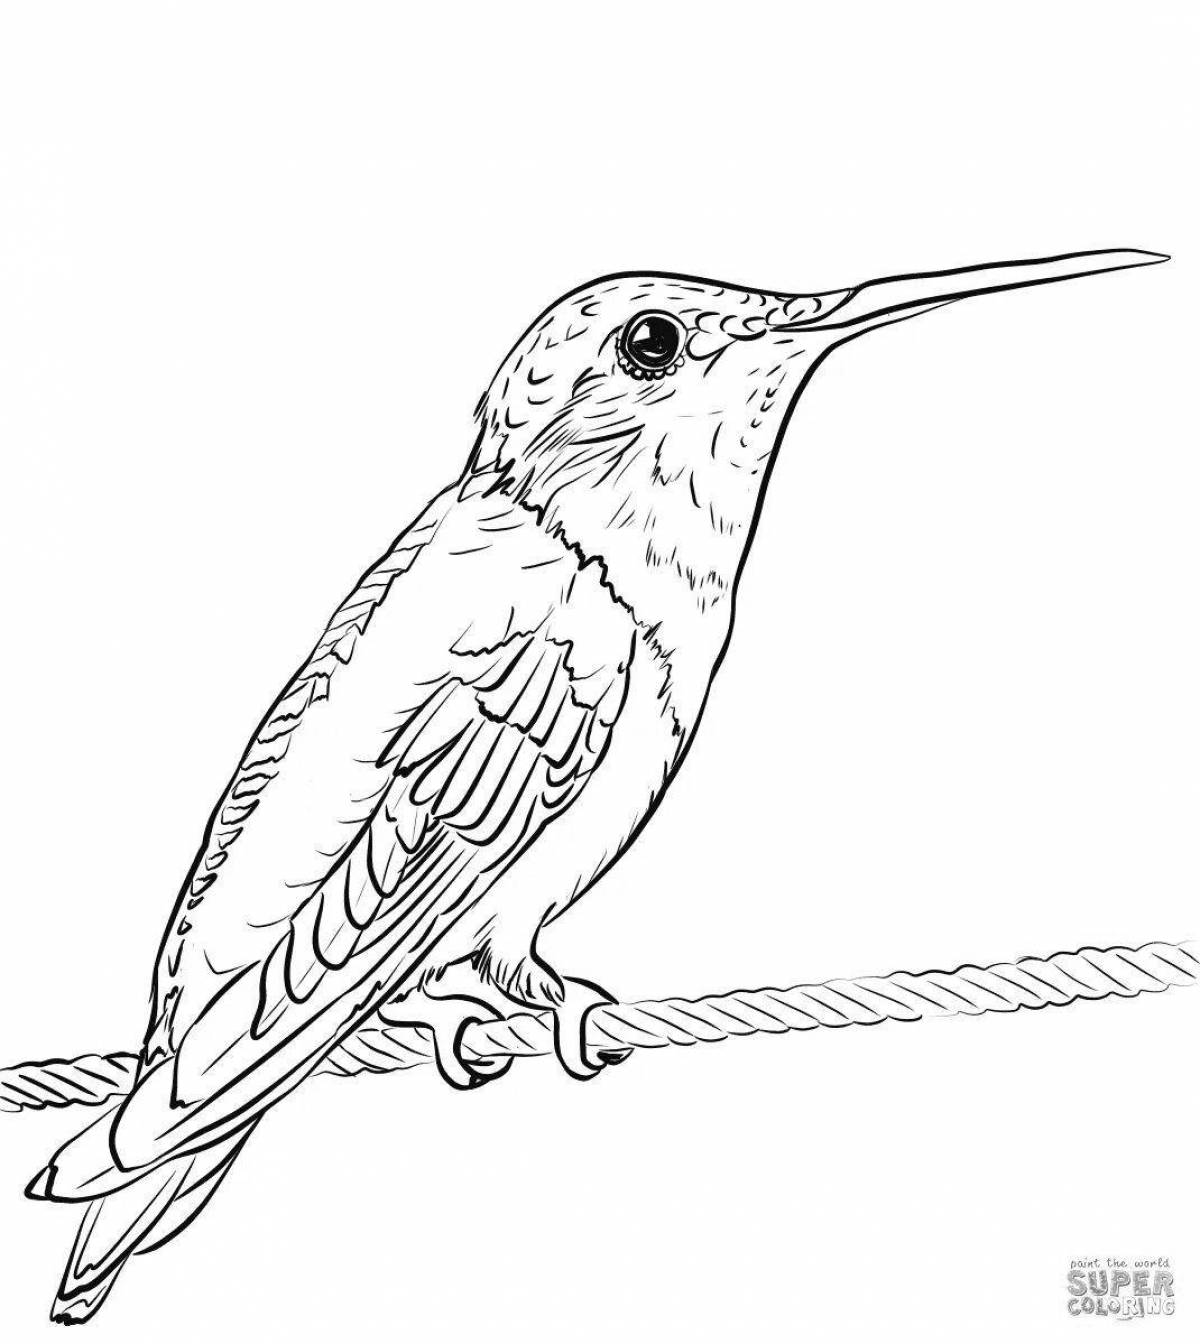 Coloring book happy kingfisher